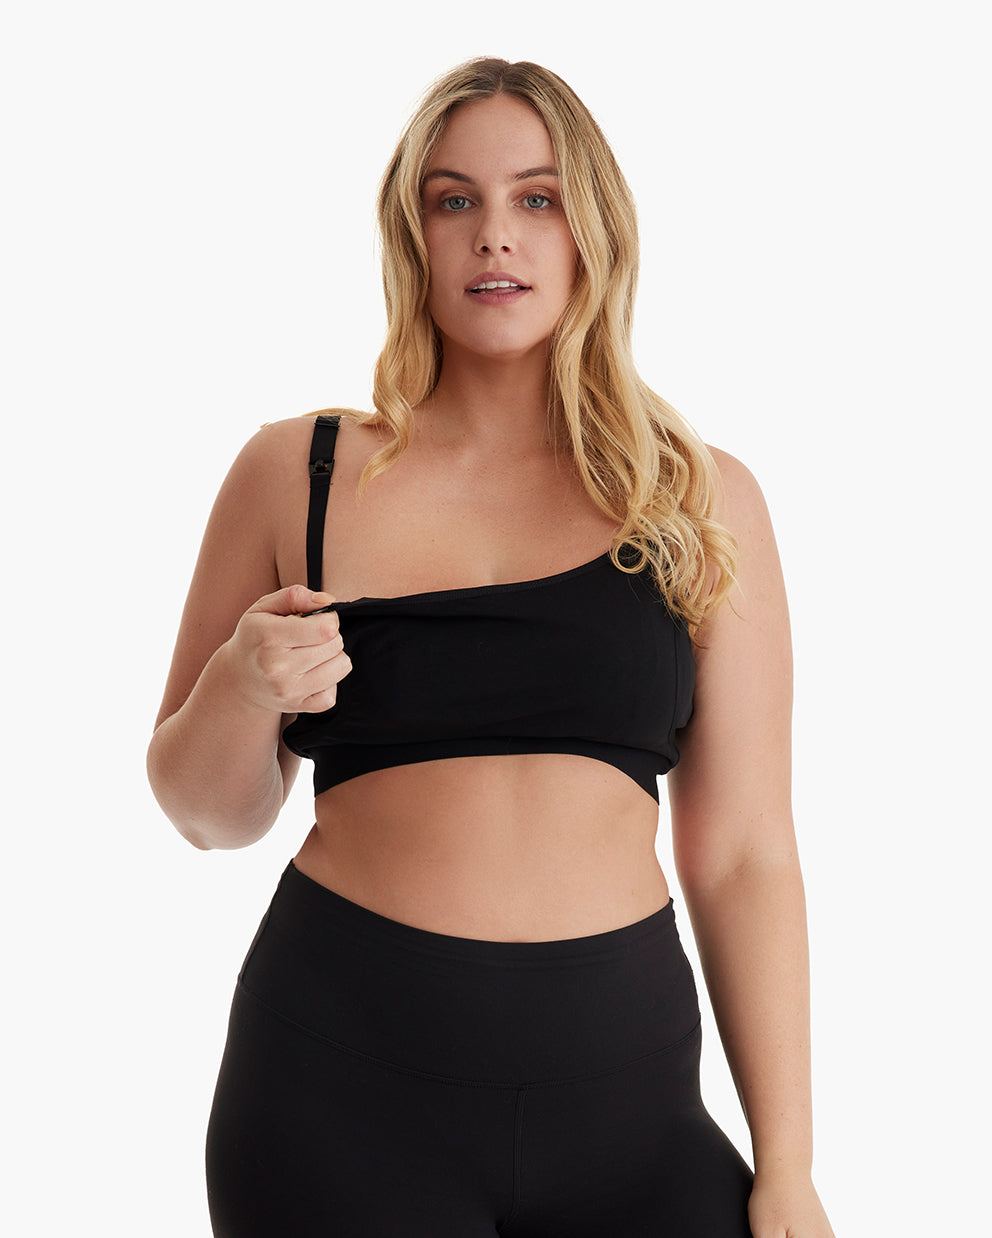 The Original: Our Basic Nursing & Pumping Bra with One-Hand Clips